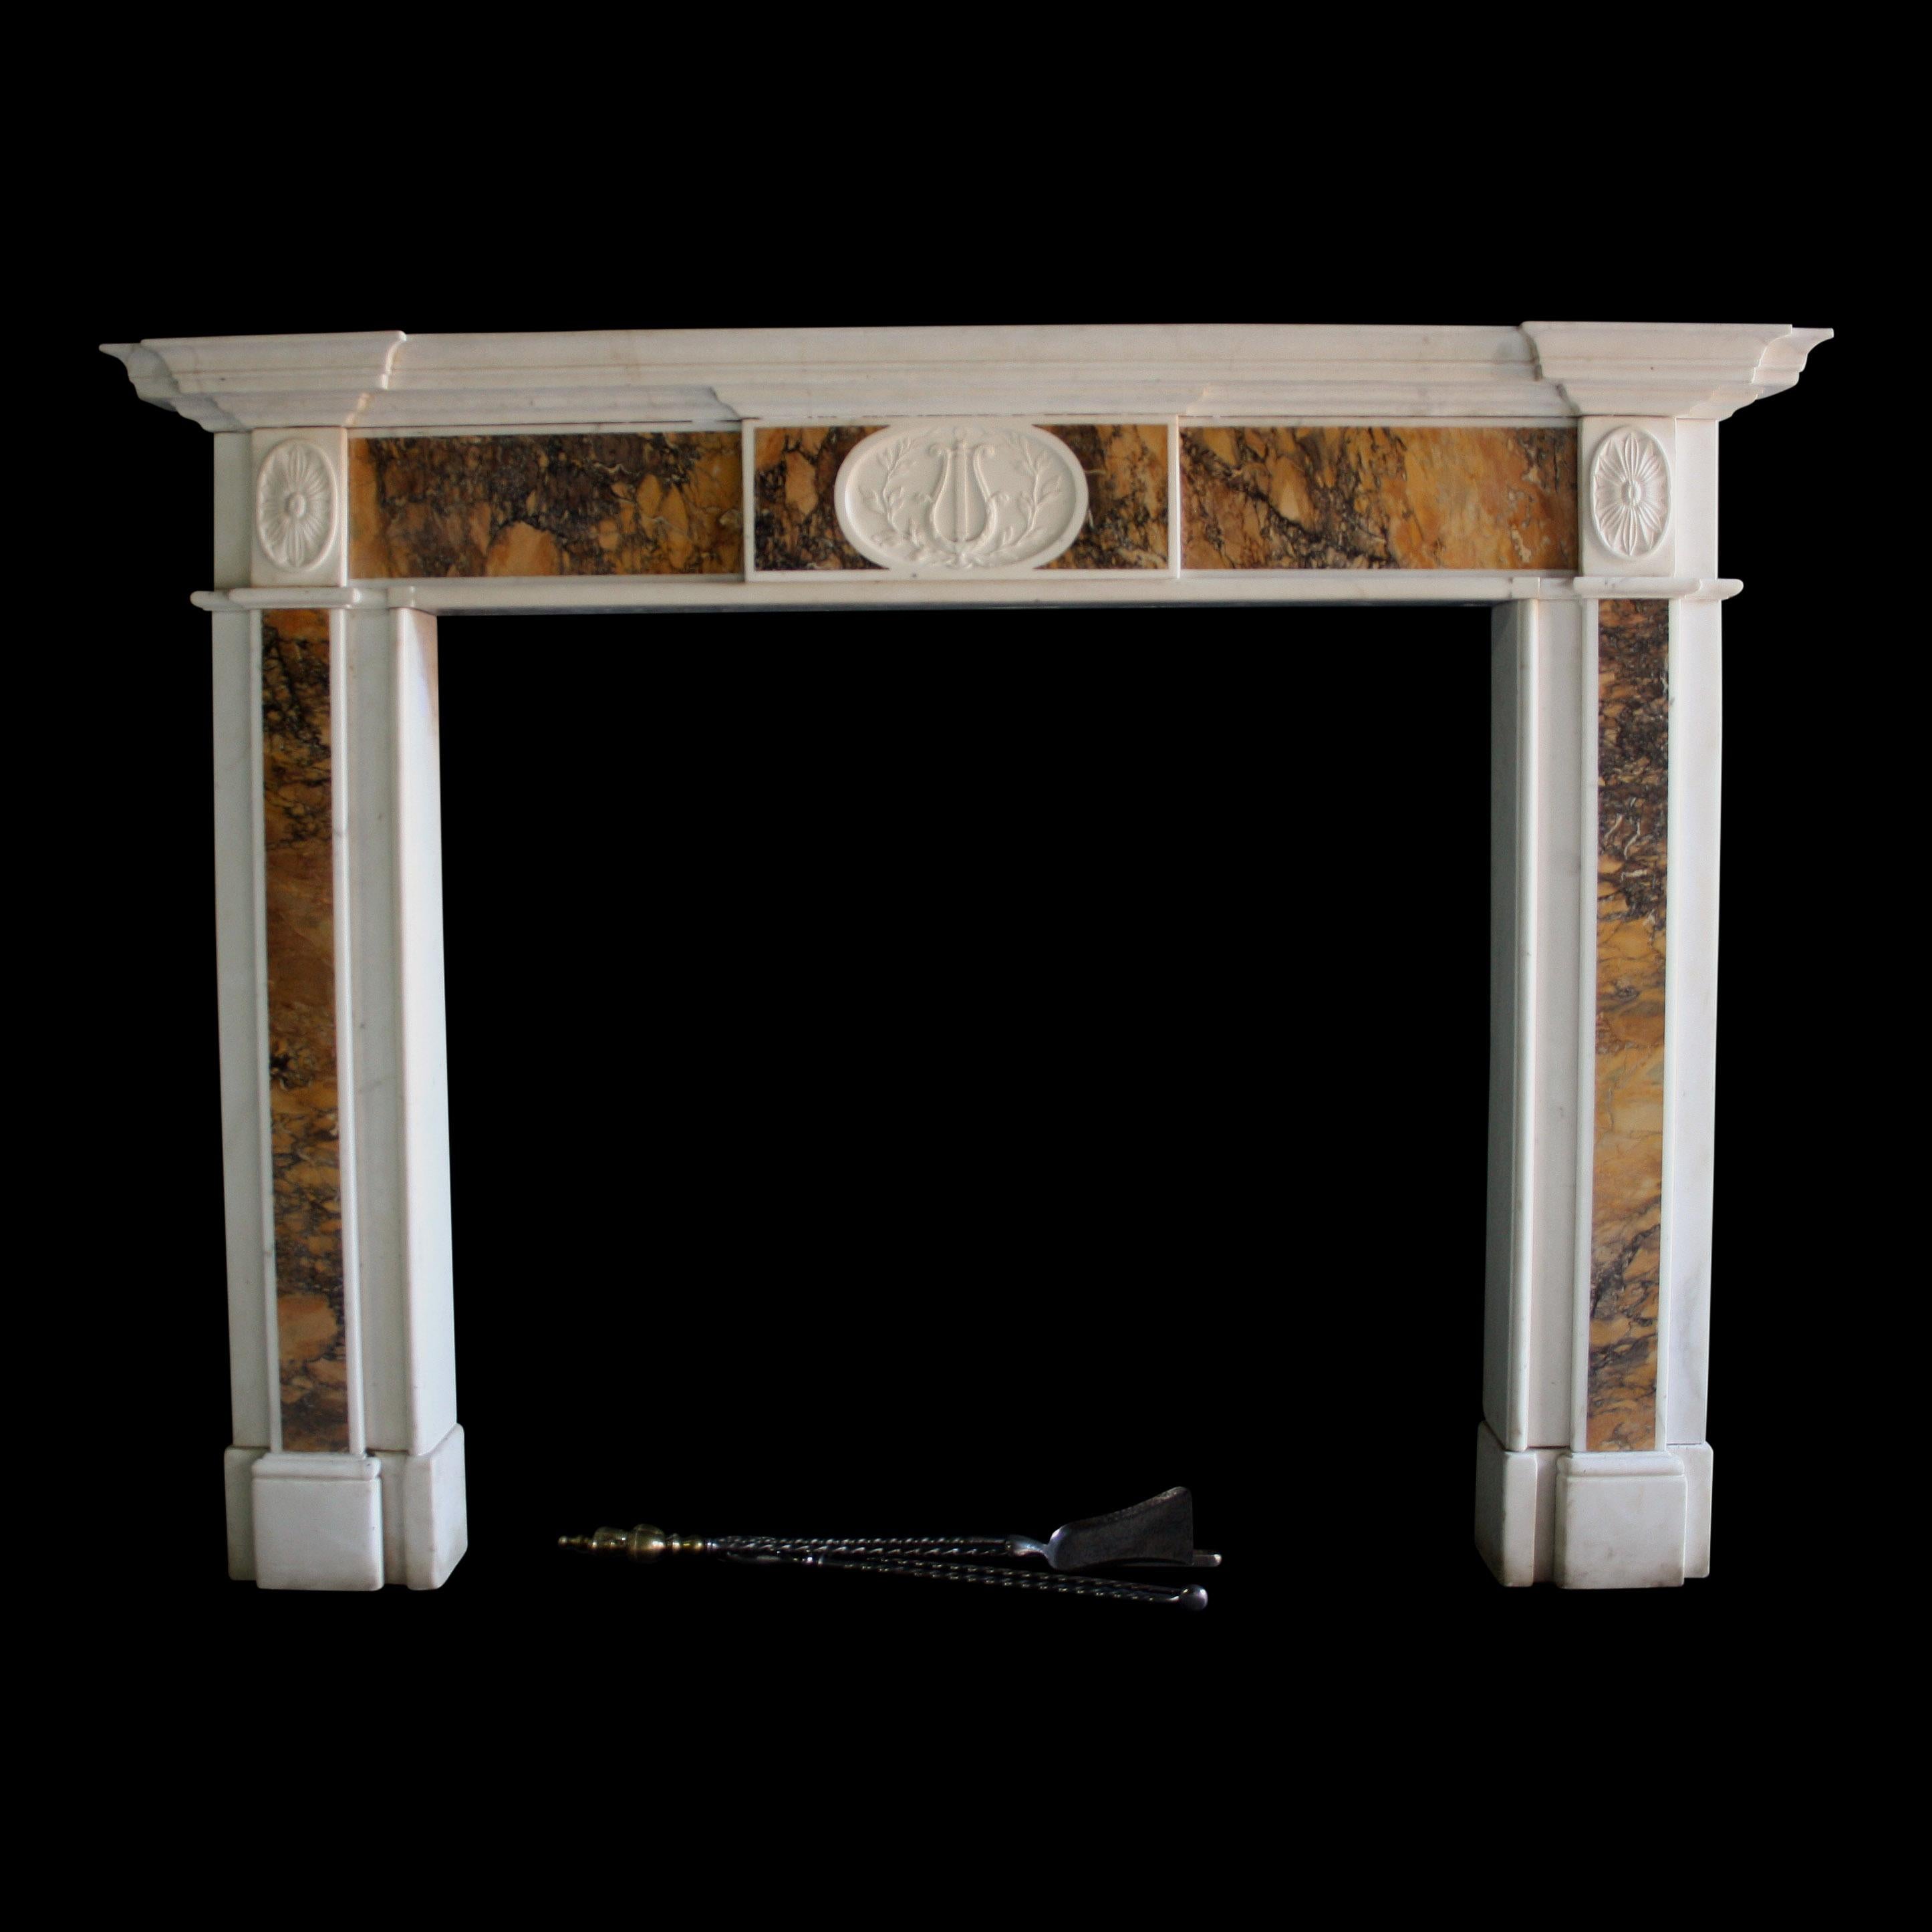 A Fine Irish Georgian Chimneypiece Circa 1770

The stepped and panelled jambs are inlaid with powerfully figured convent Siena marble standing on moulded block feet. The frieze has paterae corner blocks, convent Siena on either side of the centre